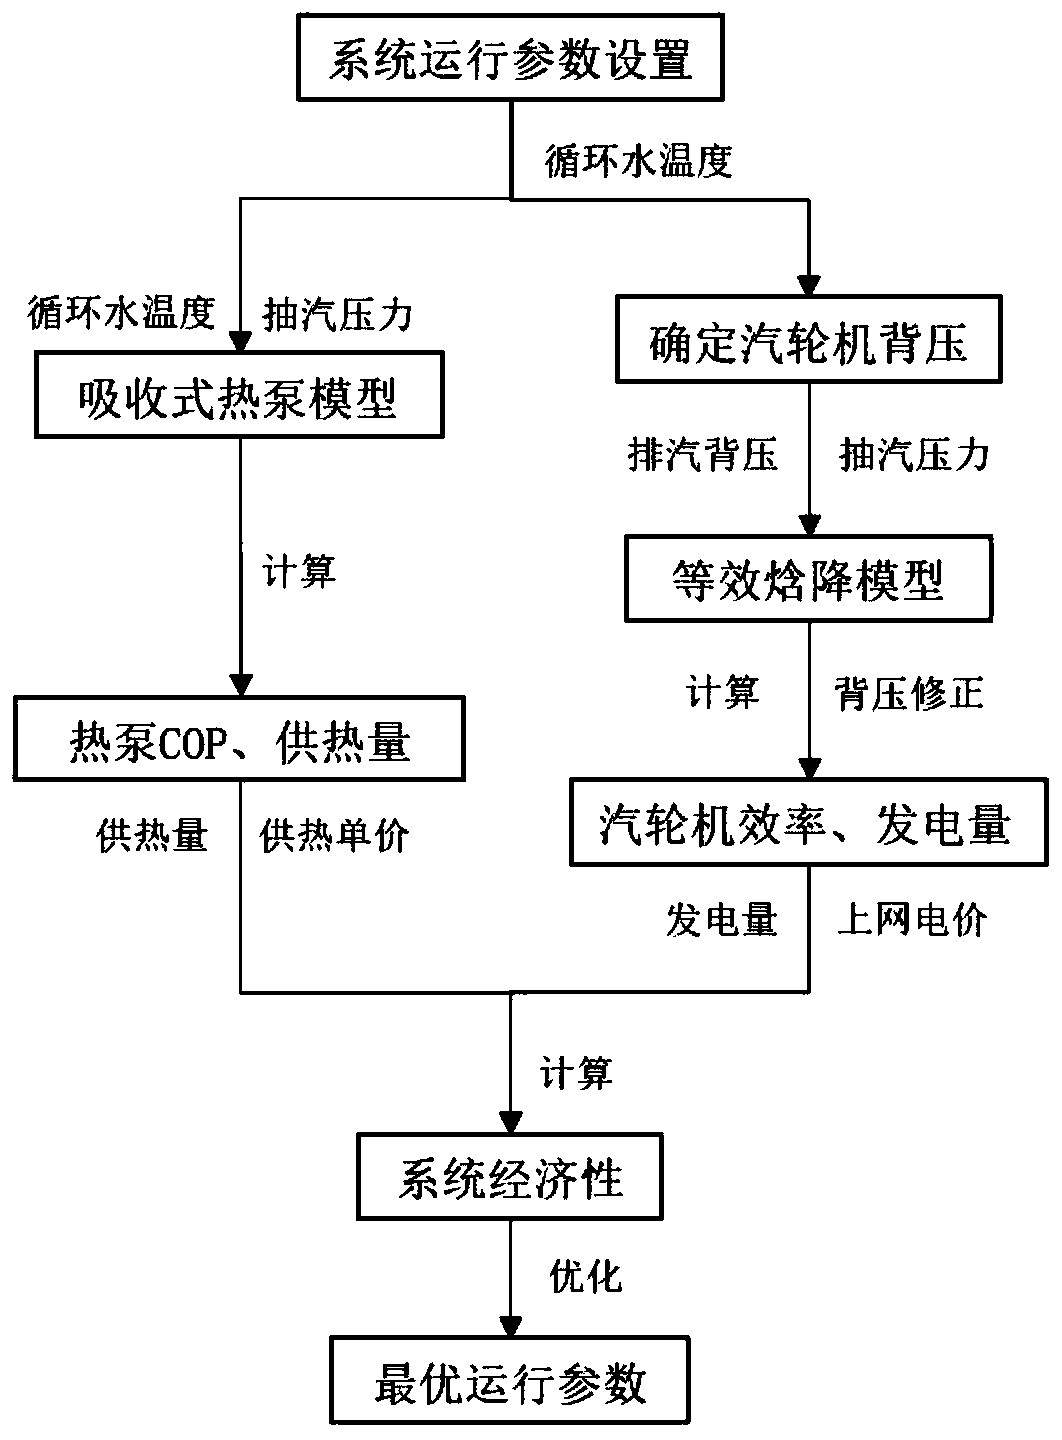 Heat supply optimization method for coupling absorption heat pump of thermal power plant